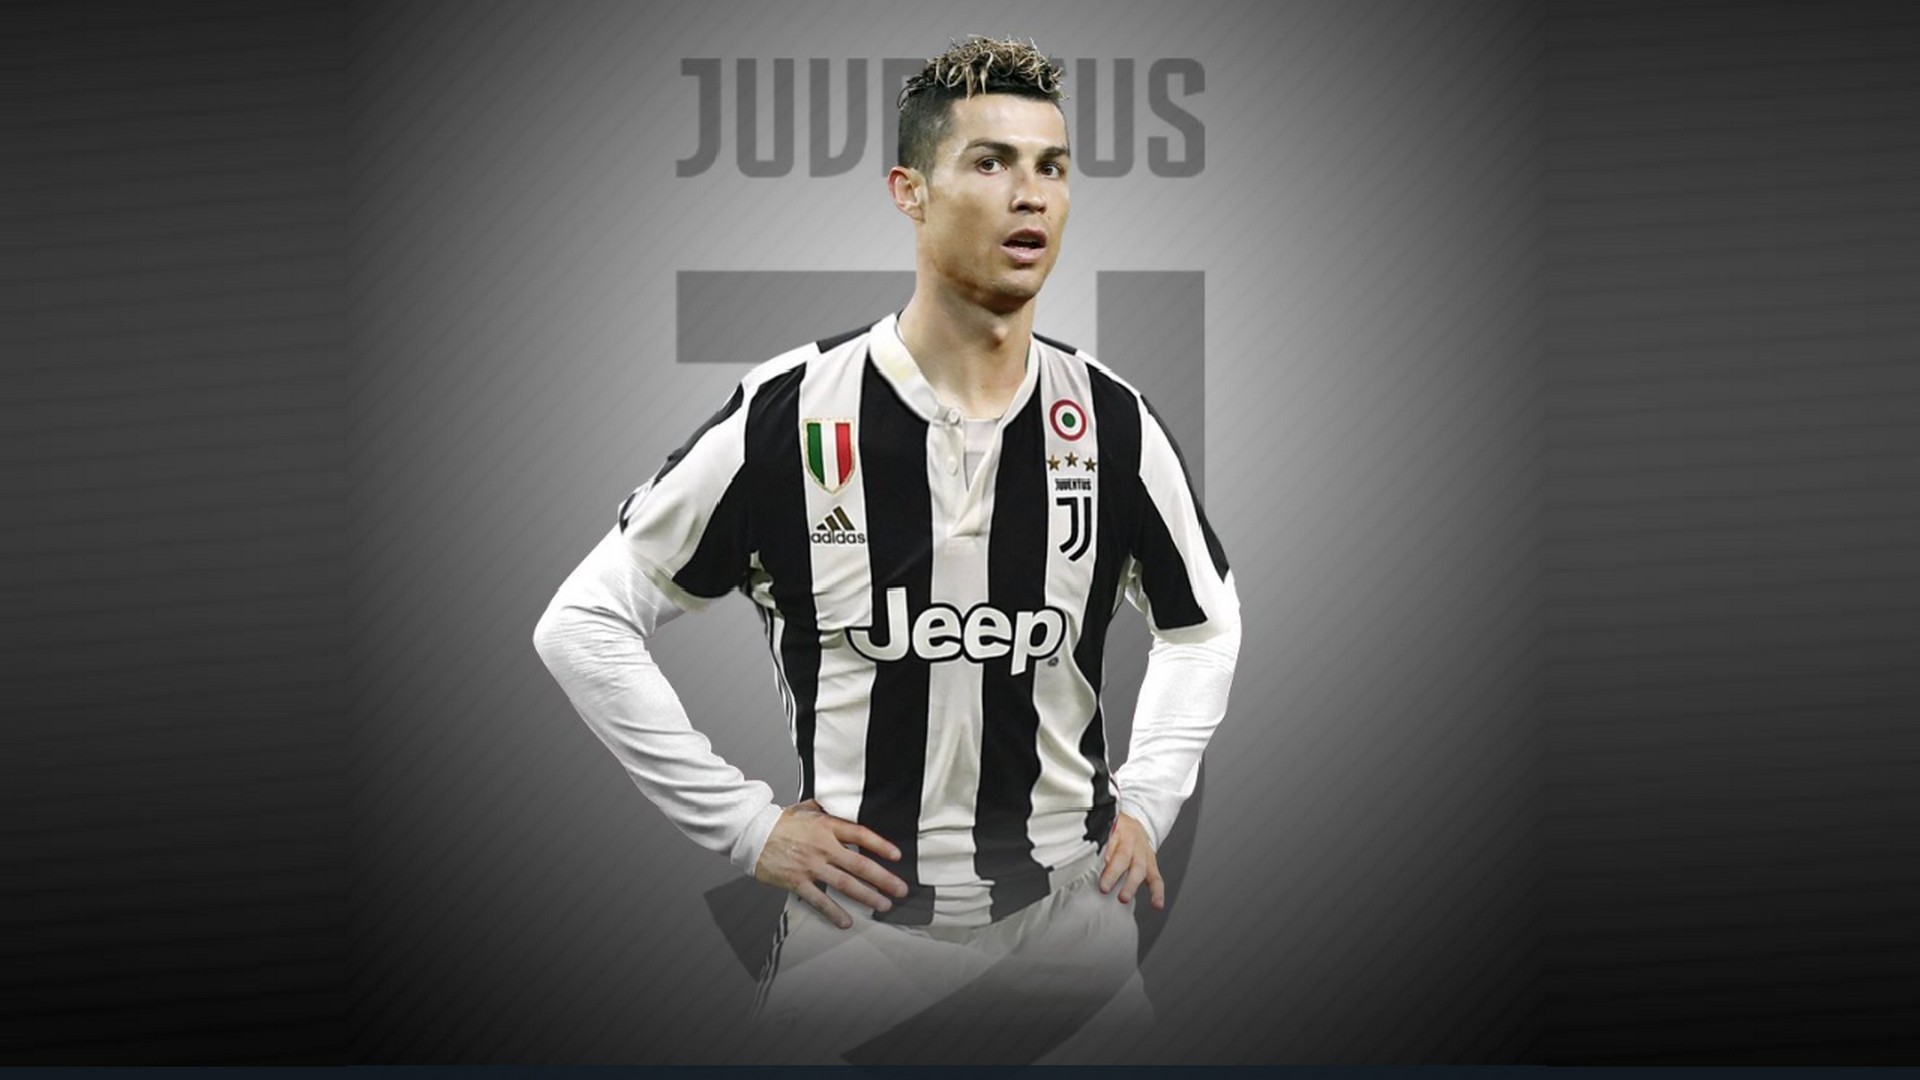 C Ronaldo Juventus Wallpaper For Desktop with image resolution 1920x1080 pixel. You can use this wallpaper as background for your desktop Computer Screensavers, Android or iPhone smartphones